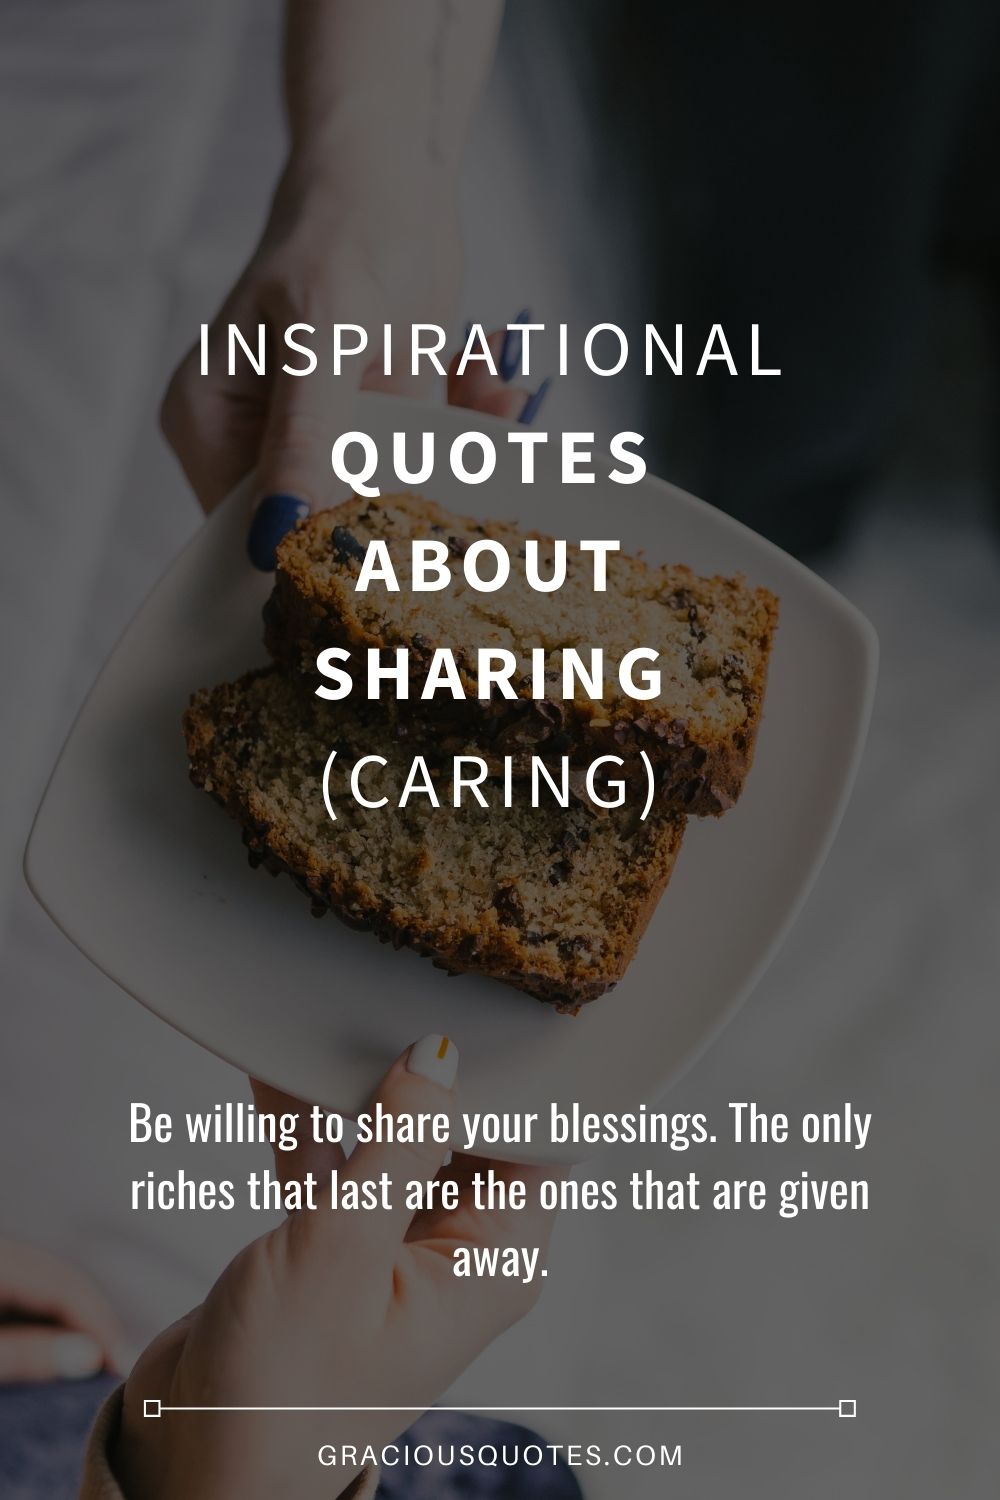 Inspirational Quotes About Sharing (CARING) - Gracious Quotes